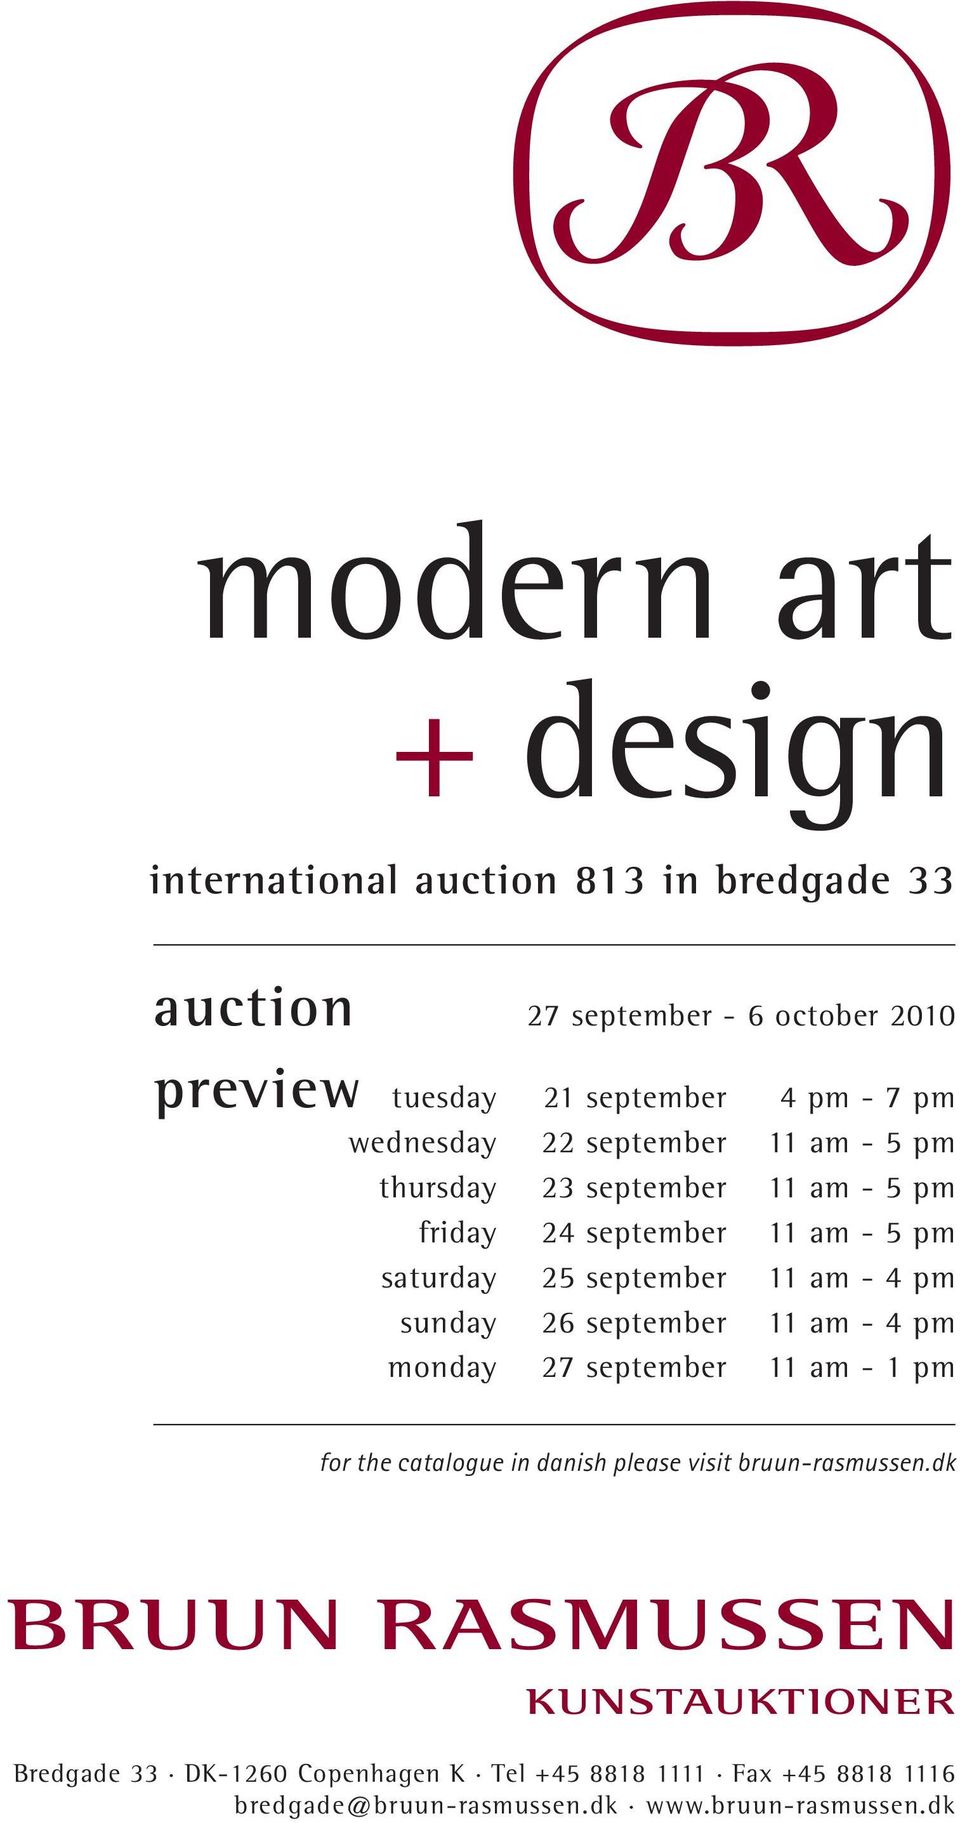 september 11 am - 4 pm sunday 26 september 11 am - 4 pm monday 27 september 11 am - 1 pm for the catalogue in danish please visit